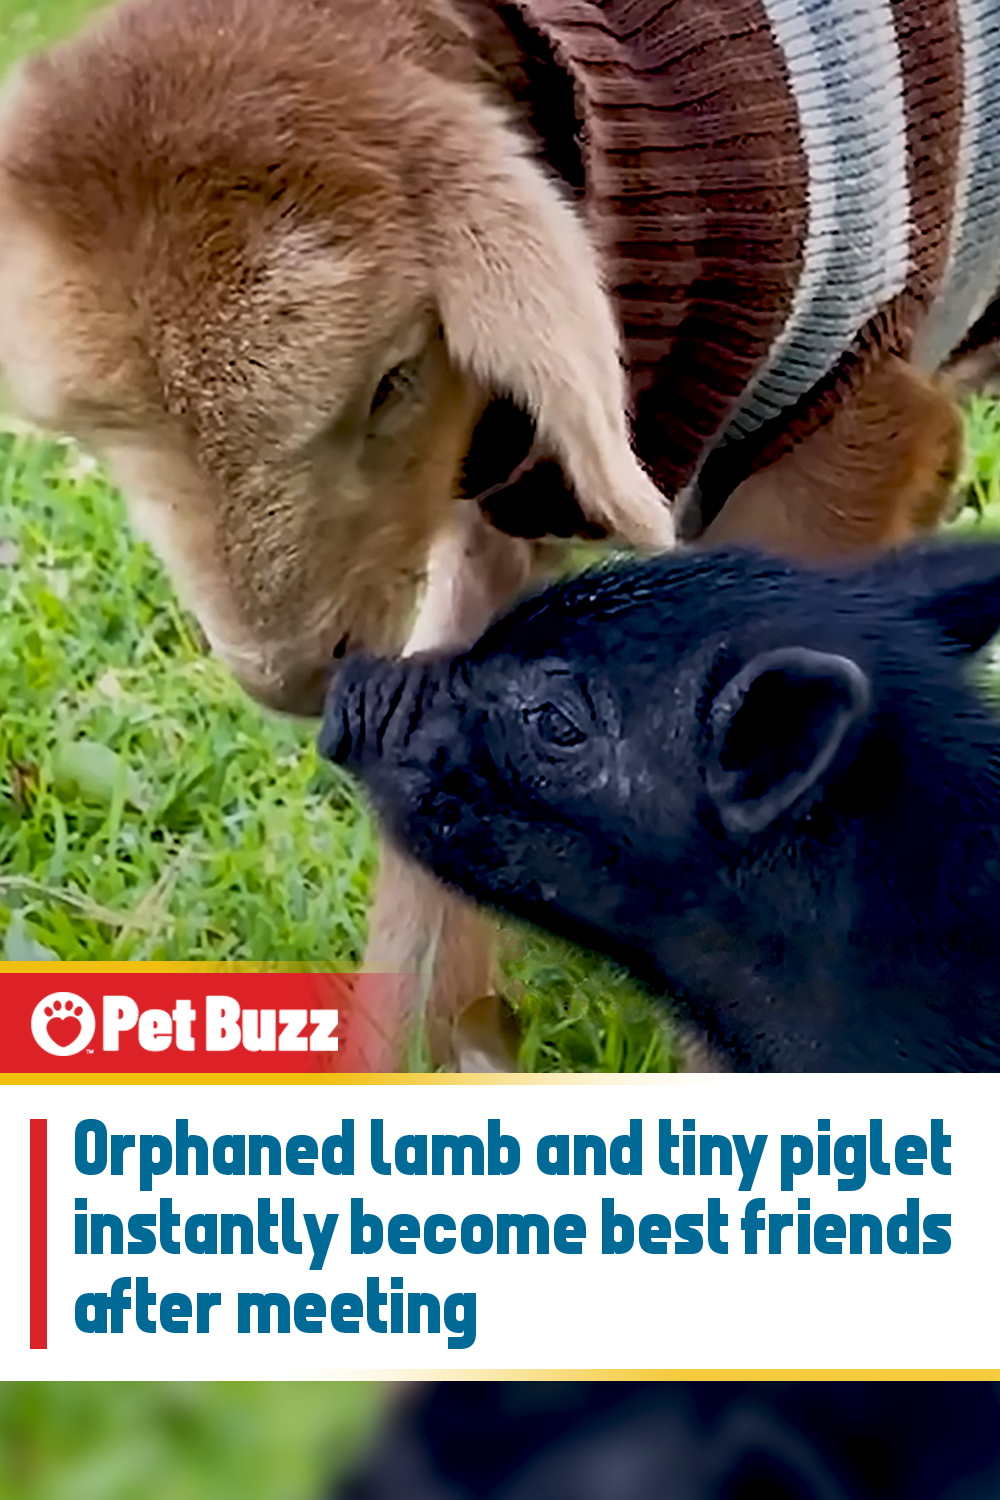 Orphaned lamb and tiny piglet instantly become best friends after meeting